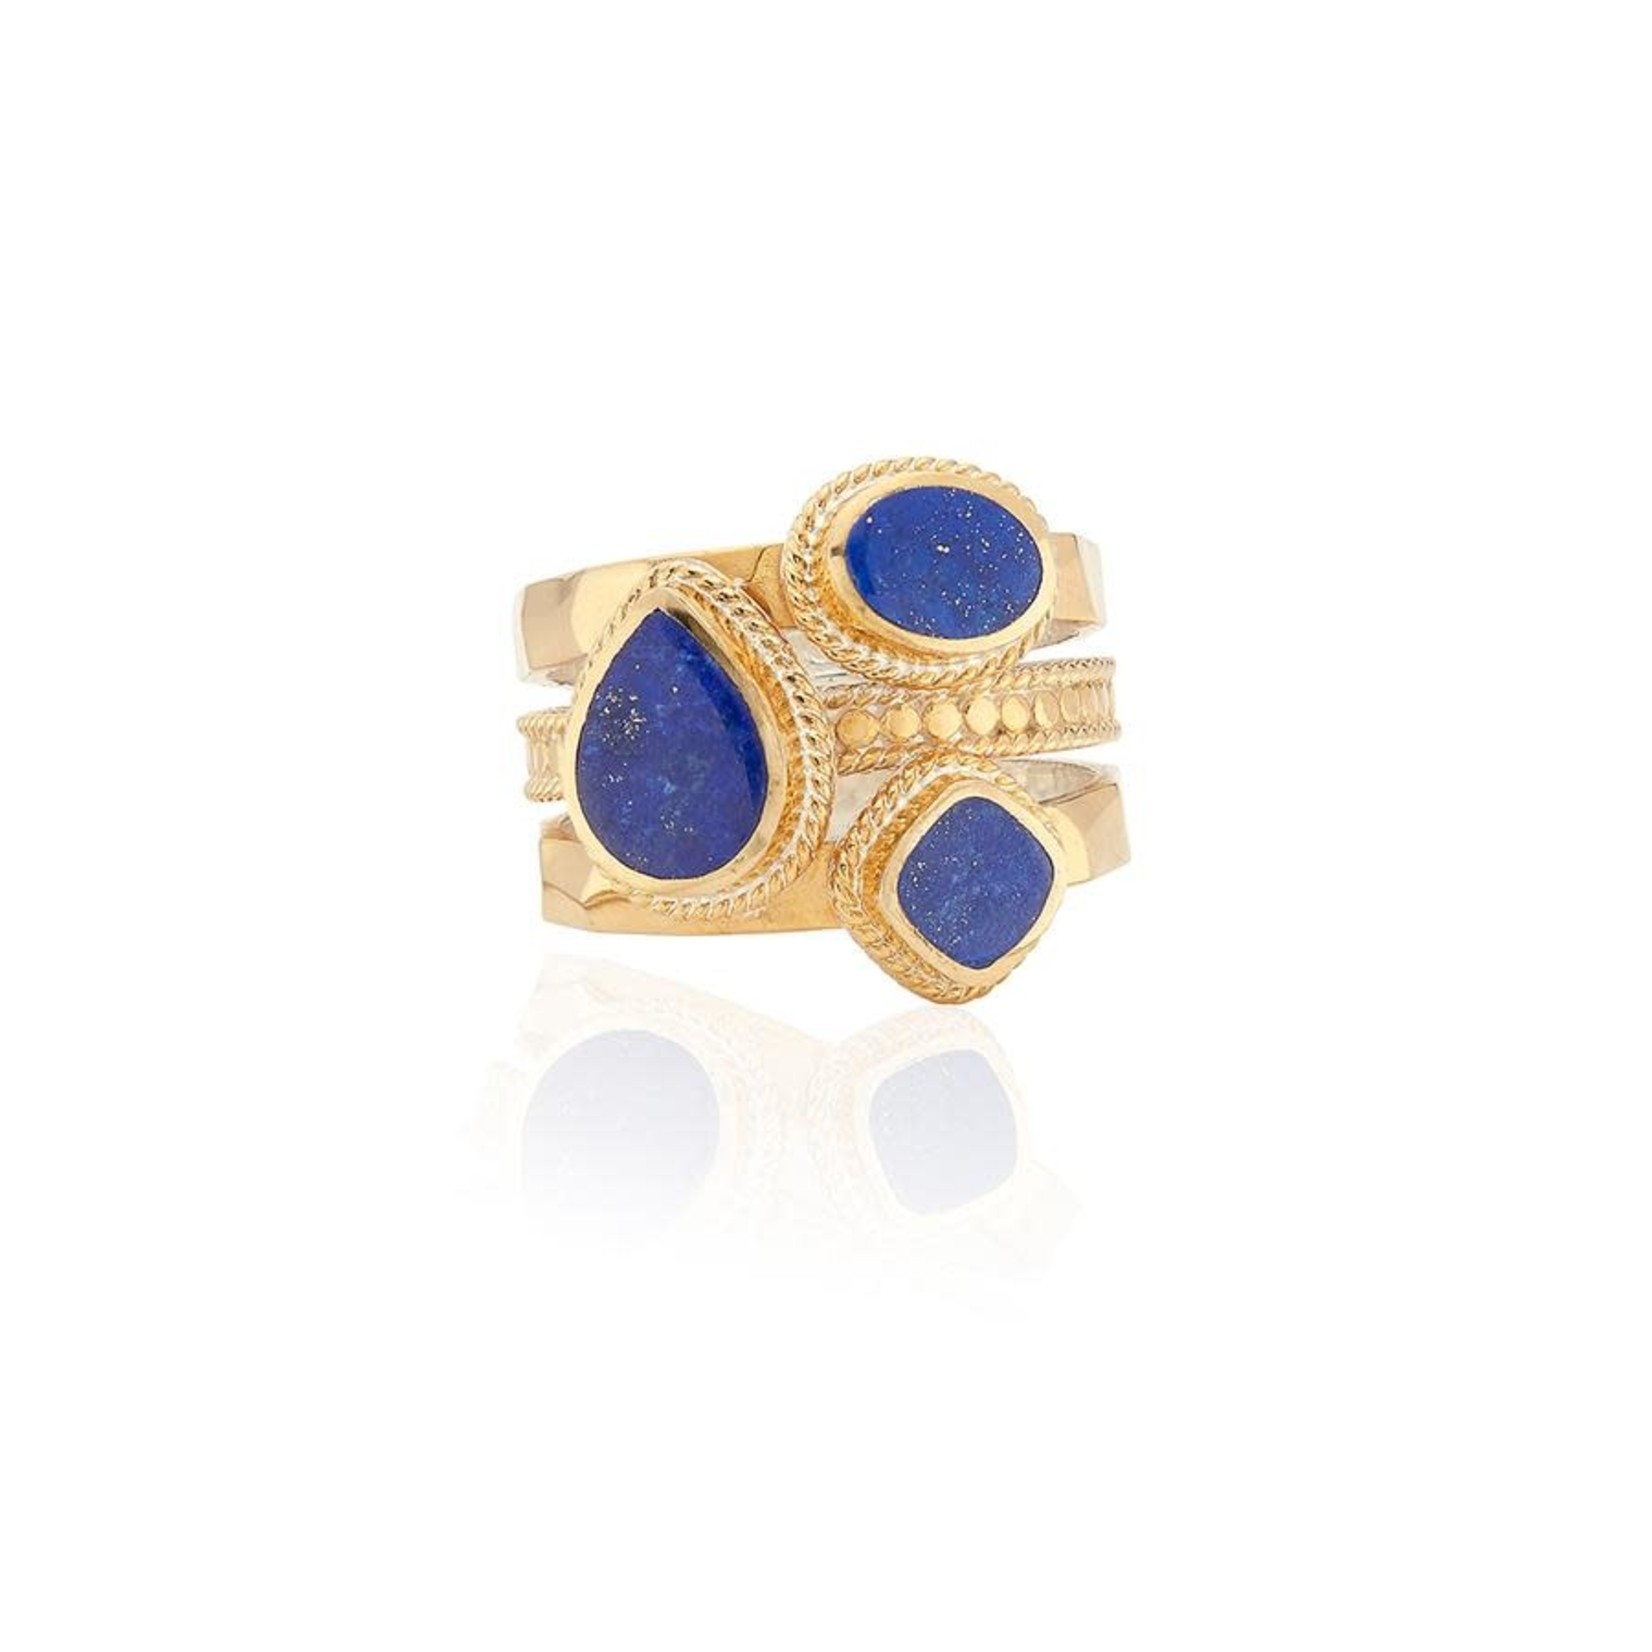 Lapis Faux Stacking Ring - 18k Gold Plate Over Sterling - Size 7 or 8